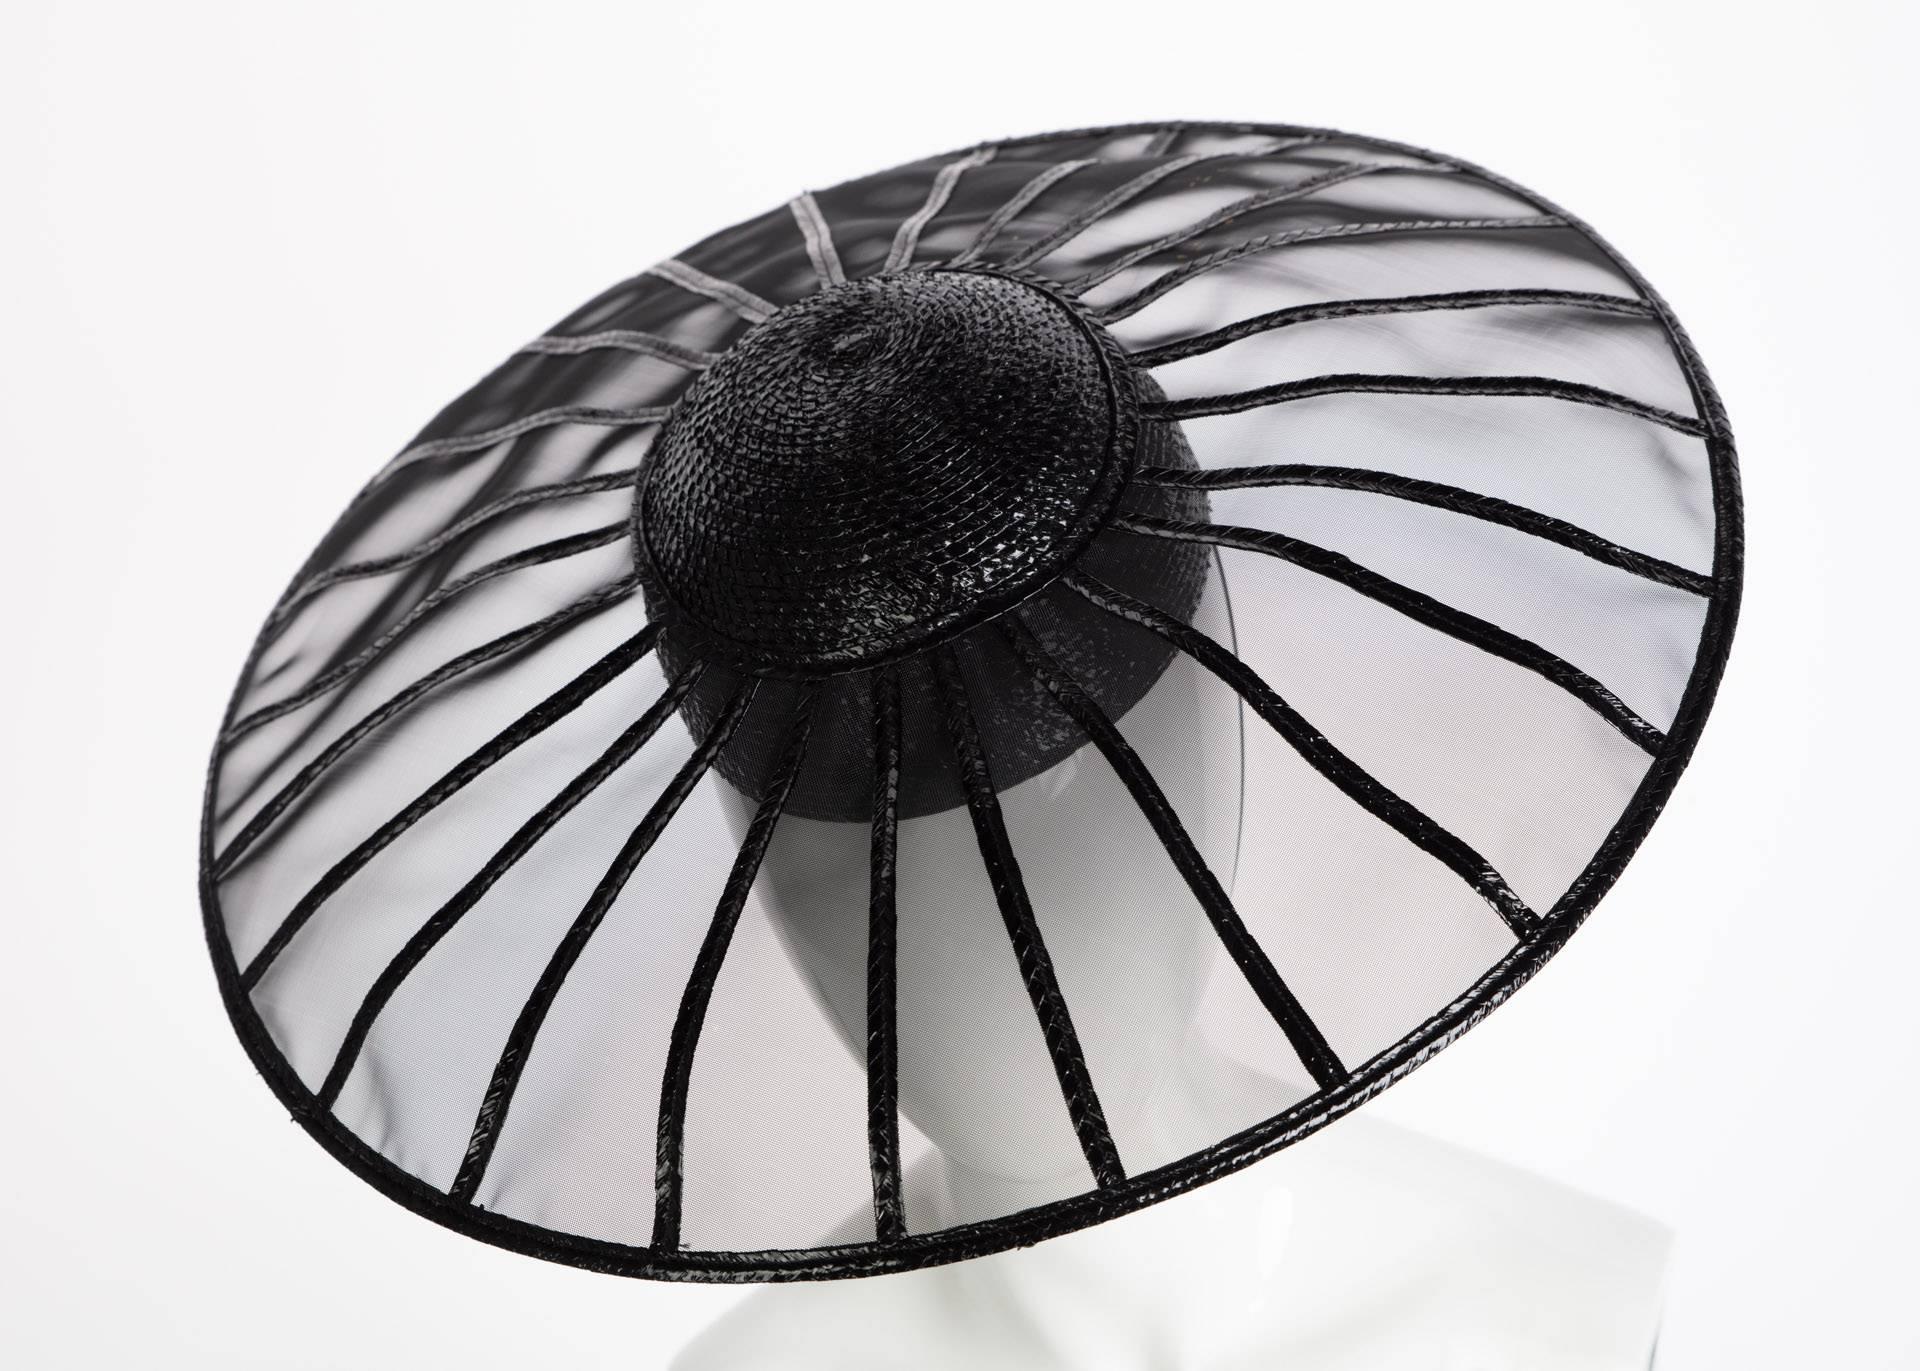 Accessories by Yves Saint Laurent speak to his design vision of sophistication and casual elegance. From refined traditional styles to exotic artistic creations, Saint Laurent has proven to be a master of millinery design. While the accessories